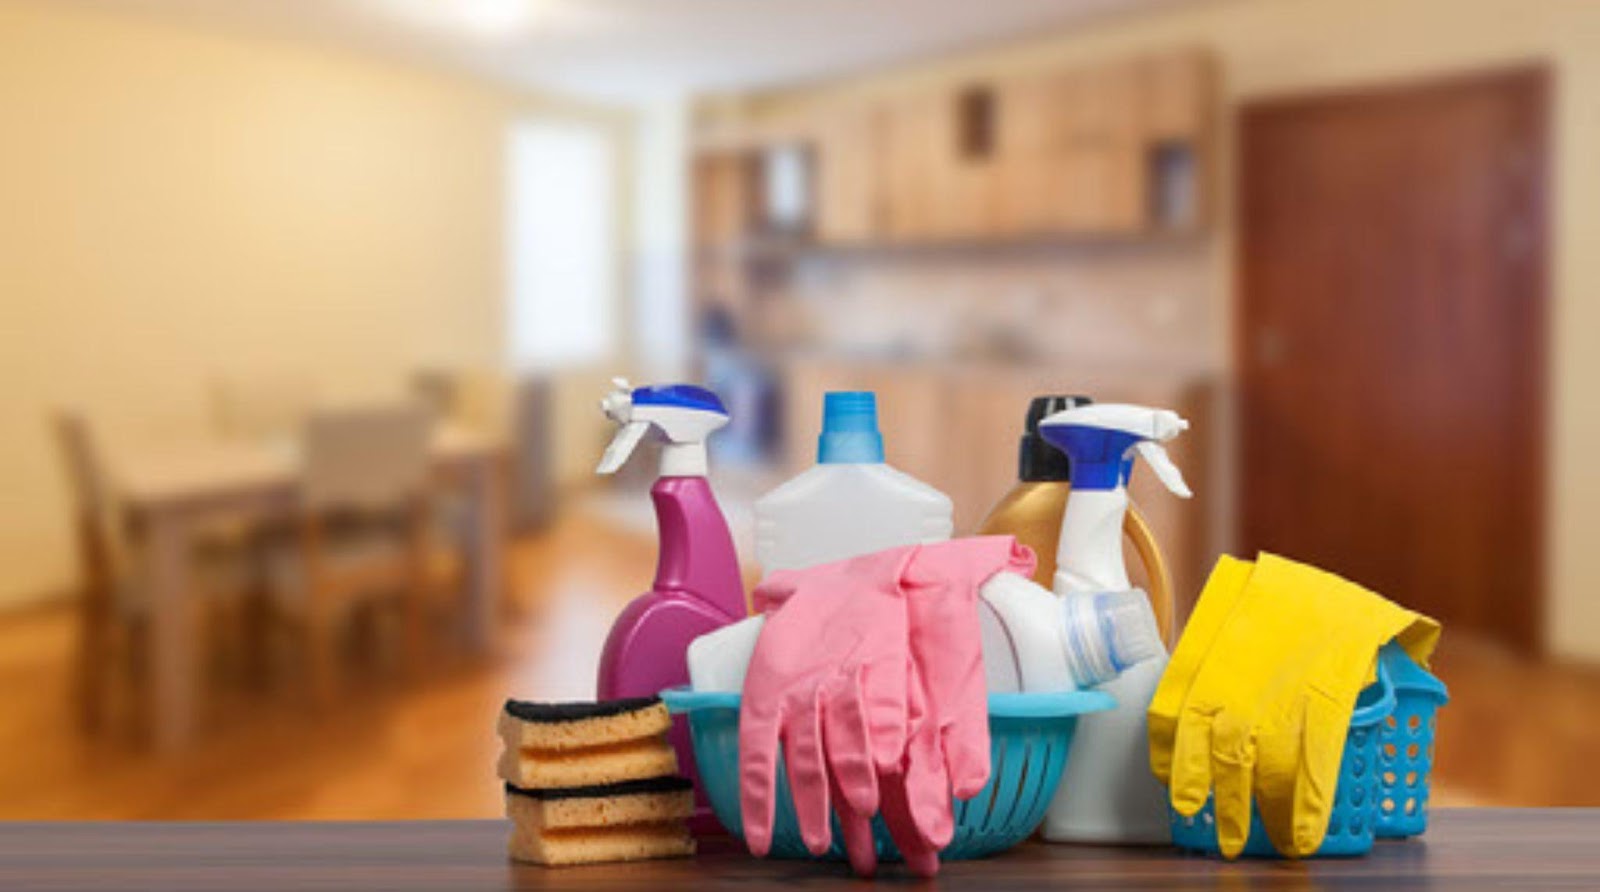 NoBroker Cleaning Expert Highlights Best Kitchen Tips That’ll Last You a Lifetime